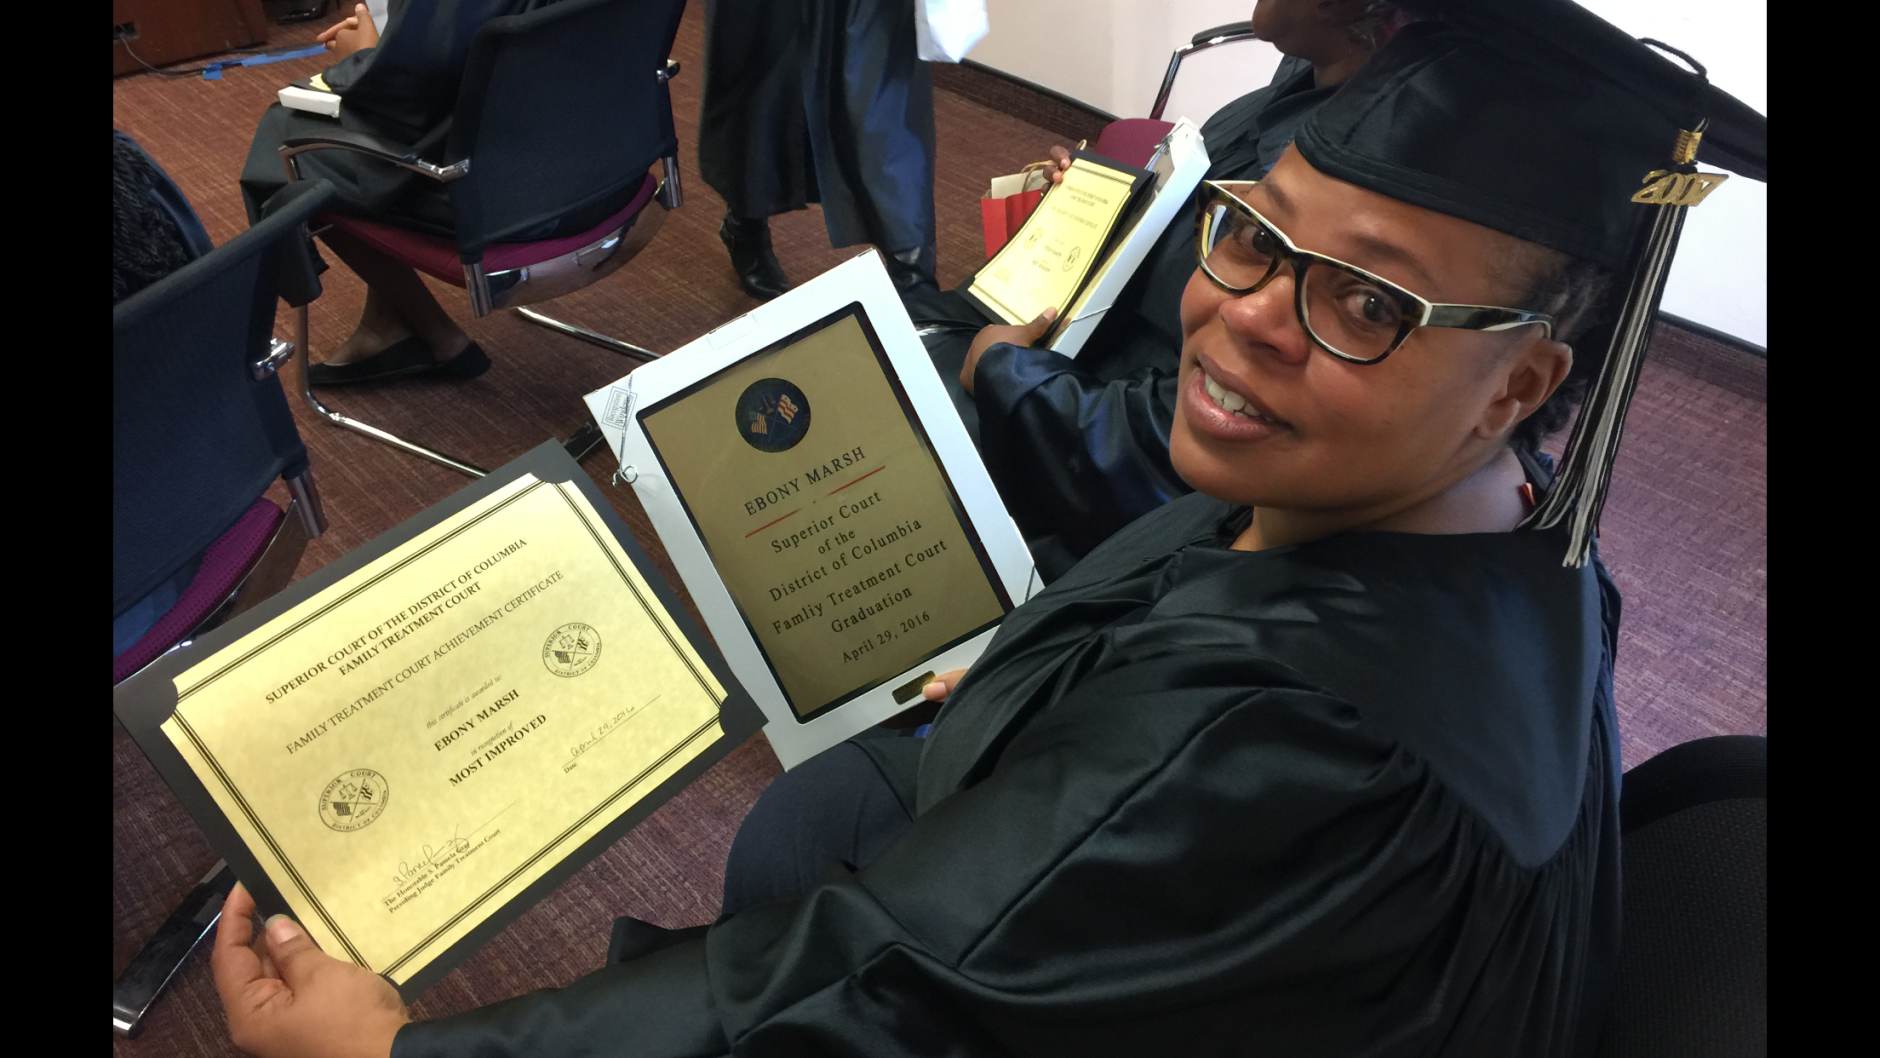 "Miss [Ebony] Marsh was a spitfire. She came into Family Treatment Court honest about her own process, she was honest about what it took to get her here, she was honest with us about the fact that she didn't know whether this would work, but she'd try it," said Dr. Sariah Beatty, Coordinator, Family Treatment Court. "We are proud to say that Miss Marsh is our 'Most Improved' graduate." (WTOP/Kristi King)